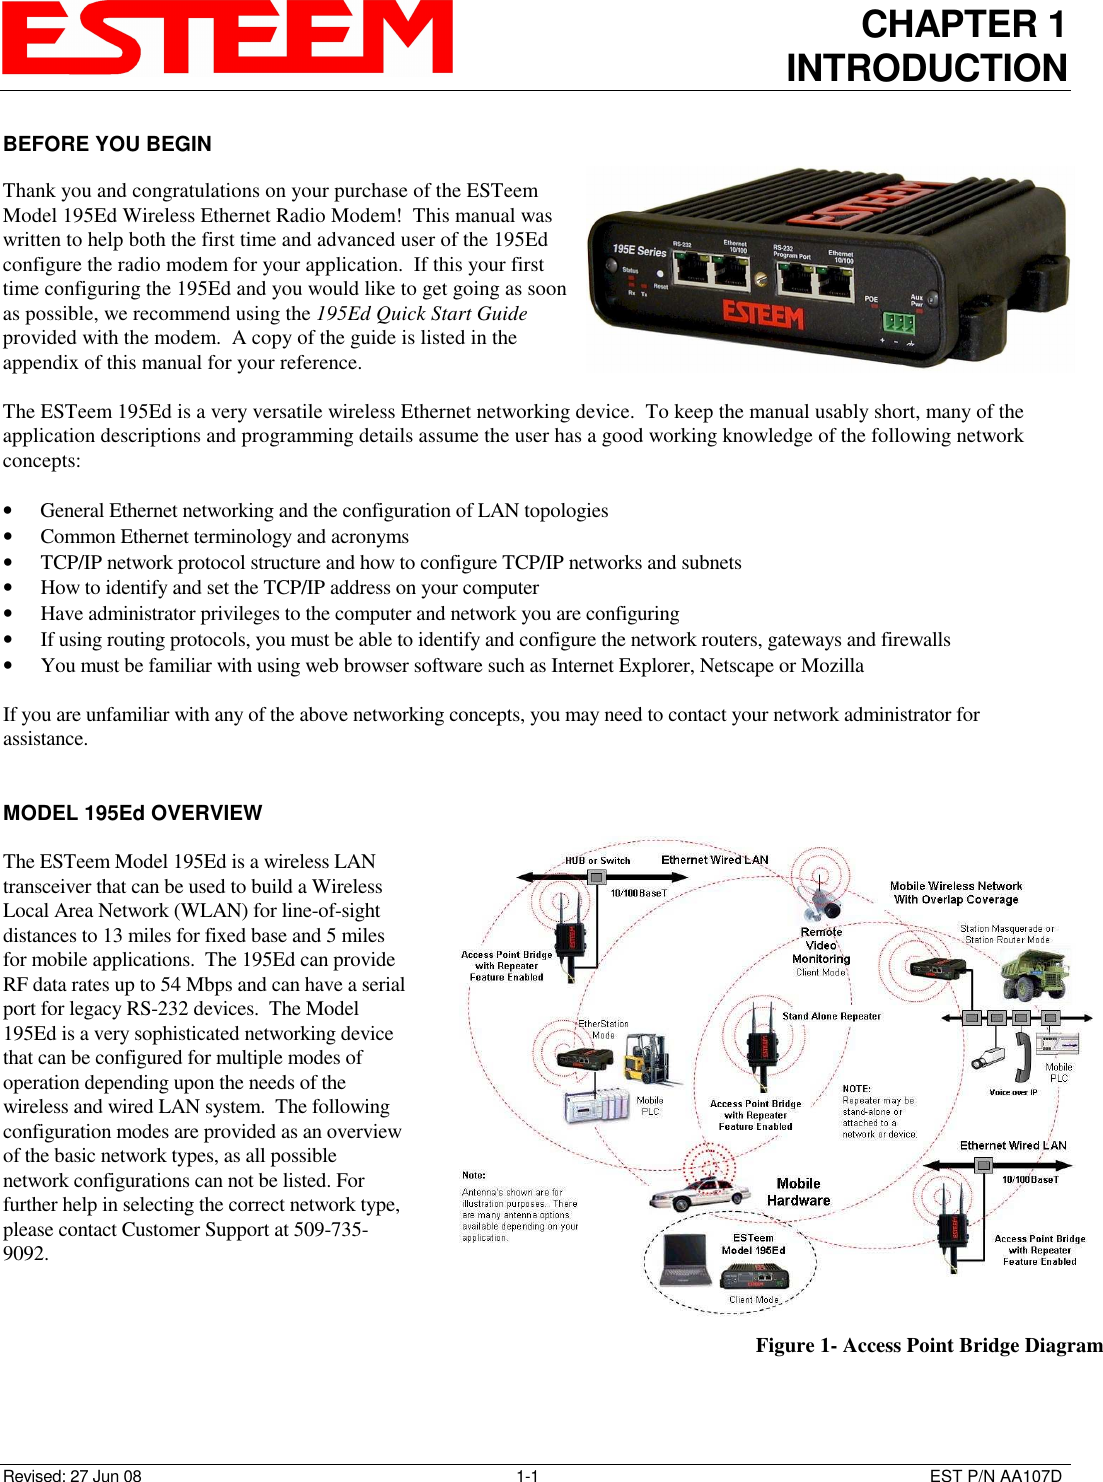 CHAPTER 1 INTRODUCTION   Revised: 27 Jun 08  1-1  EST P/N AA107D BEFORE YOU BEGIN  Thank you and congratulations on your purchase of the ESTeem Model 195Ed Wireless Ethernet Radio Modem!  This manual was written to help both the first time and advanced user of the 195Ed configure the radio modem for your application.  If this your first time configuring the 195Ed and you would like to get going as soon as possible, we recommend using the 195Ed Quick Start Guide provided with the modem.  A copy of the guide is listed in the appendix of this manual for your reference.  The ESTeem 195Ed is a very versatile wireless Ethernet networking device.  To keep the manual usably short, many of the application descriptions and programming details assume the user has a good working knowledge of the following network concepts:  • General Ethernet networking and the configuration of LAN topologies  • Common Ethernet terminology and acronyms • TCP/IP network protocol structure and how to configure TCP/IP networks and subnets • How to identify and set the TCP/IP address on your computer • Have administrator privileges to the computer and network you are configuring • If using routing protocols, you must be able to identify and configure the network routers, gateways and firewalls • You must be familiar with using web browser software such as Internet Explorer, Netscape or Mozilla  If you are unfamiliar with any of the above networking concepts, you may need to contact your network administrator for assistance.   MODEL 195Ed OVERVIEW  The ESTeem Model 195Ed is a wireless LAN transceiver that can be used to build a Wireless Local Area Network (WLAN) for line-of-sight distances to 13 miles for fixed base and 5 miles for mobile applications.  The 195Ed can provide RF data rates up to 54 Mbps and can have a serial port for legacy RS-232 devices.  The Model 195Ed is a very sophisticated networking device that can be configured for multiple modes of operation depending upon the needs of the wireless and wired LAN system.  The following configuration modes are provided as an overview of the basic network types, as all possible network configurations can not be listed. For further help in selecting the correct network type, please contact Customer Support at 509-735-9092.     Figure 1- Access Point Bridge Diagram 